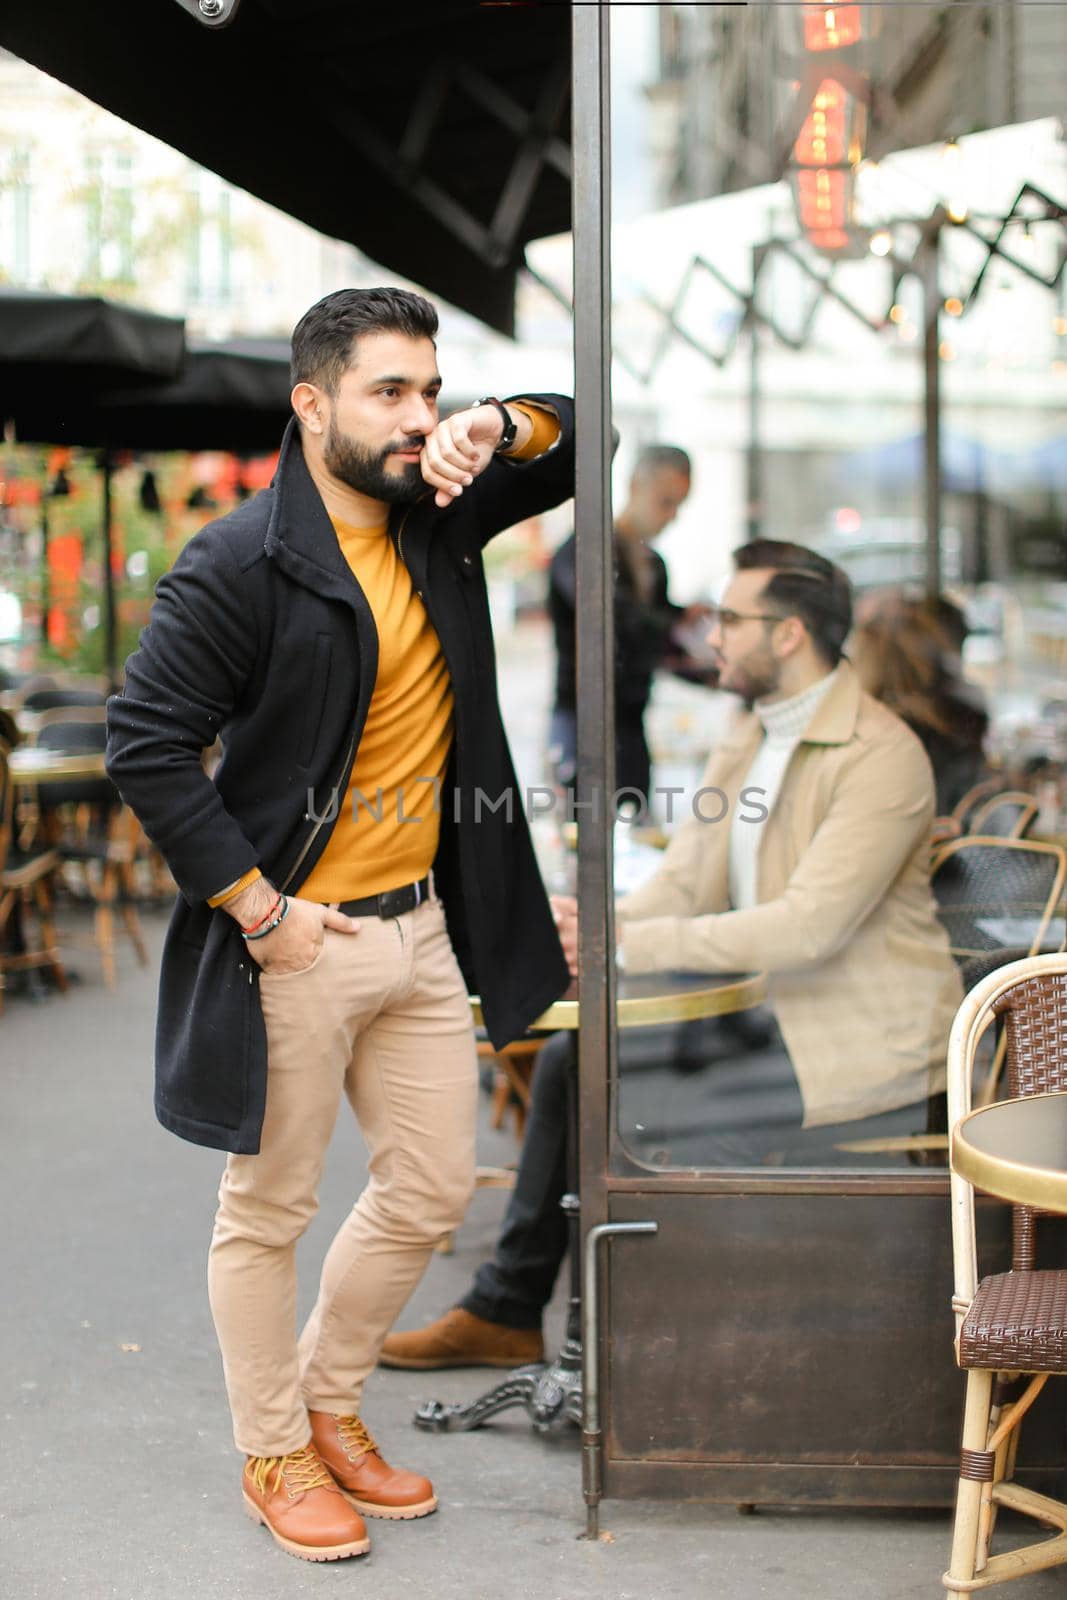 Young fashionable european man standing at street cafe outdoors. Concept of life style and male fashion.